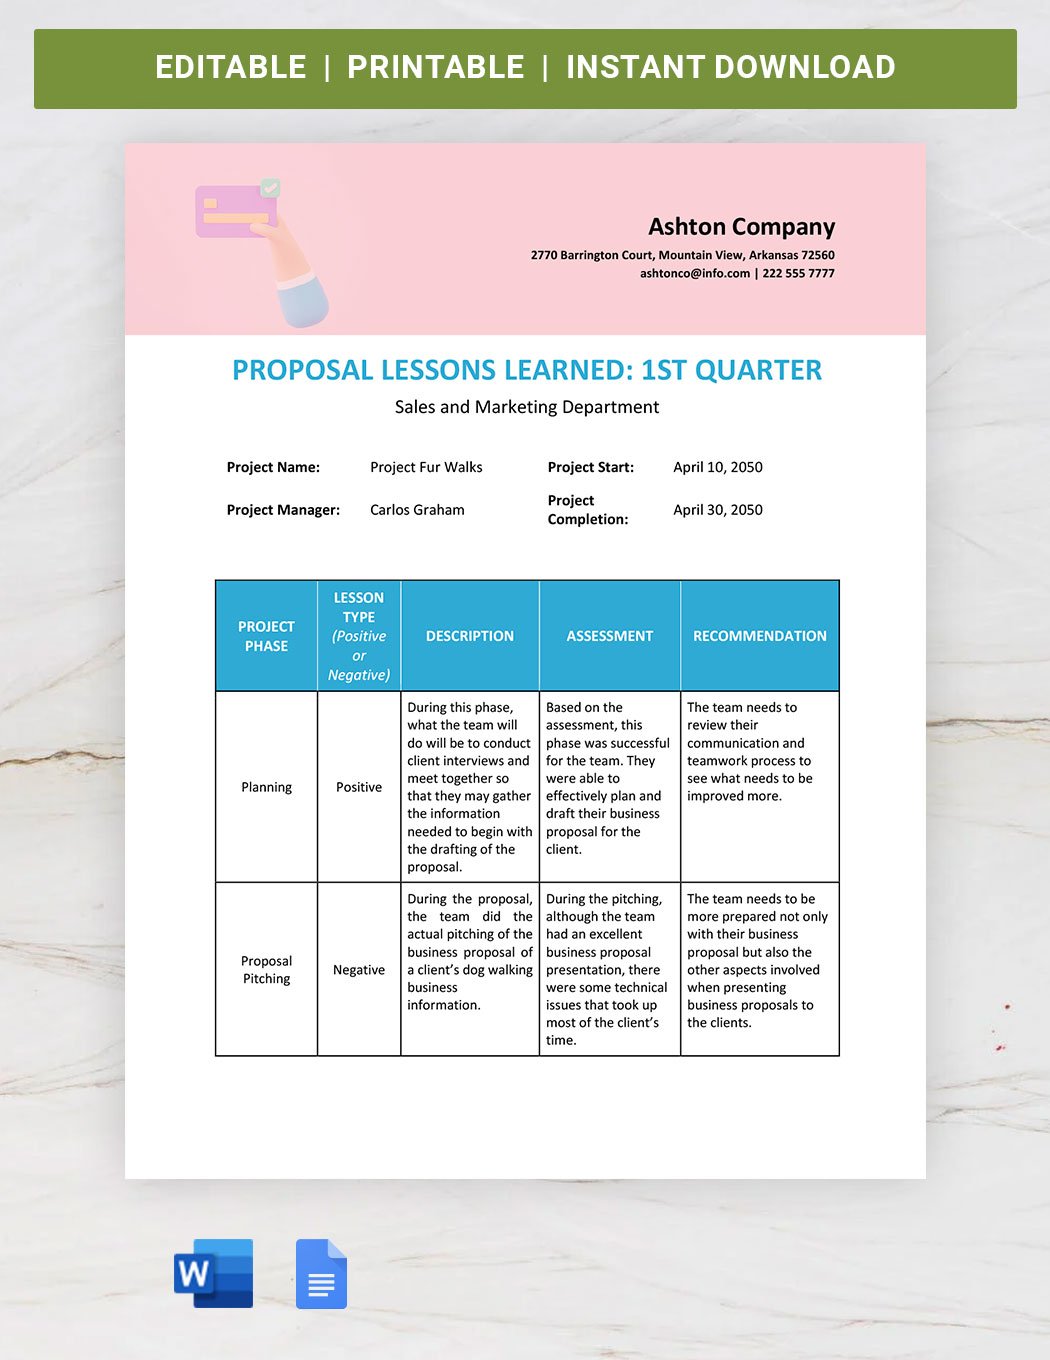 Proposal Lessons Learned Template in Word, Google Docs